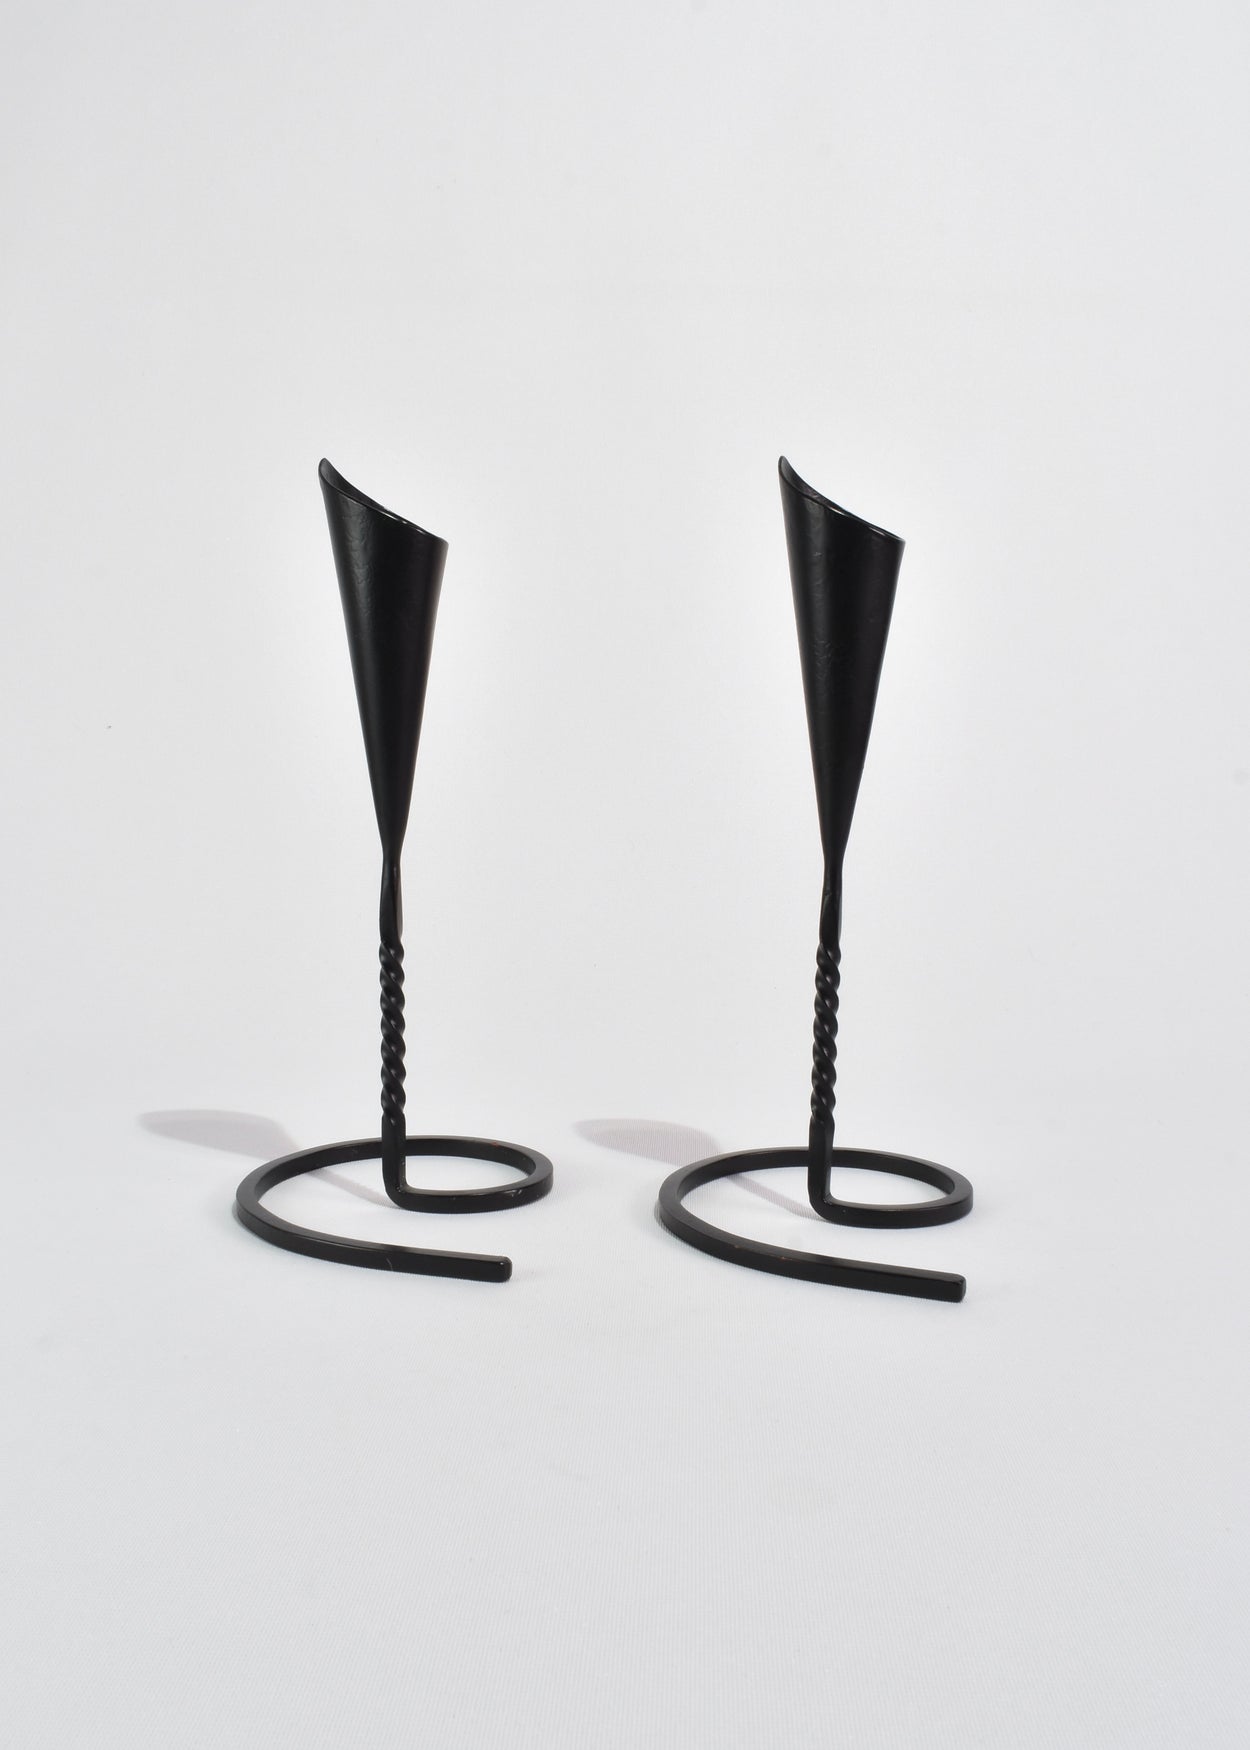 Calla Lily Candleholders